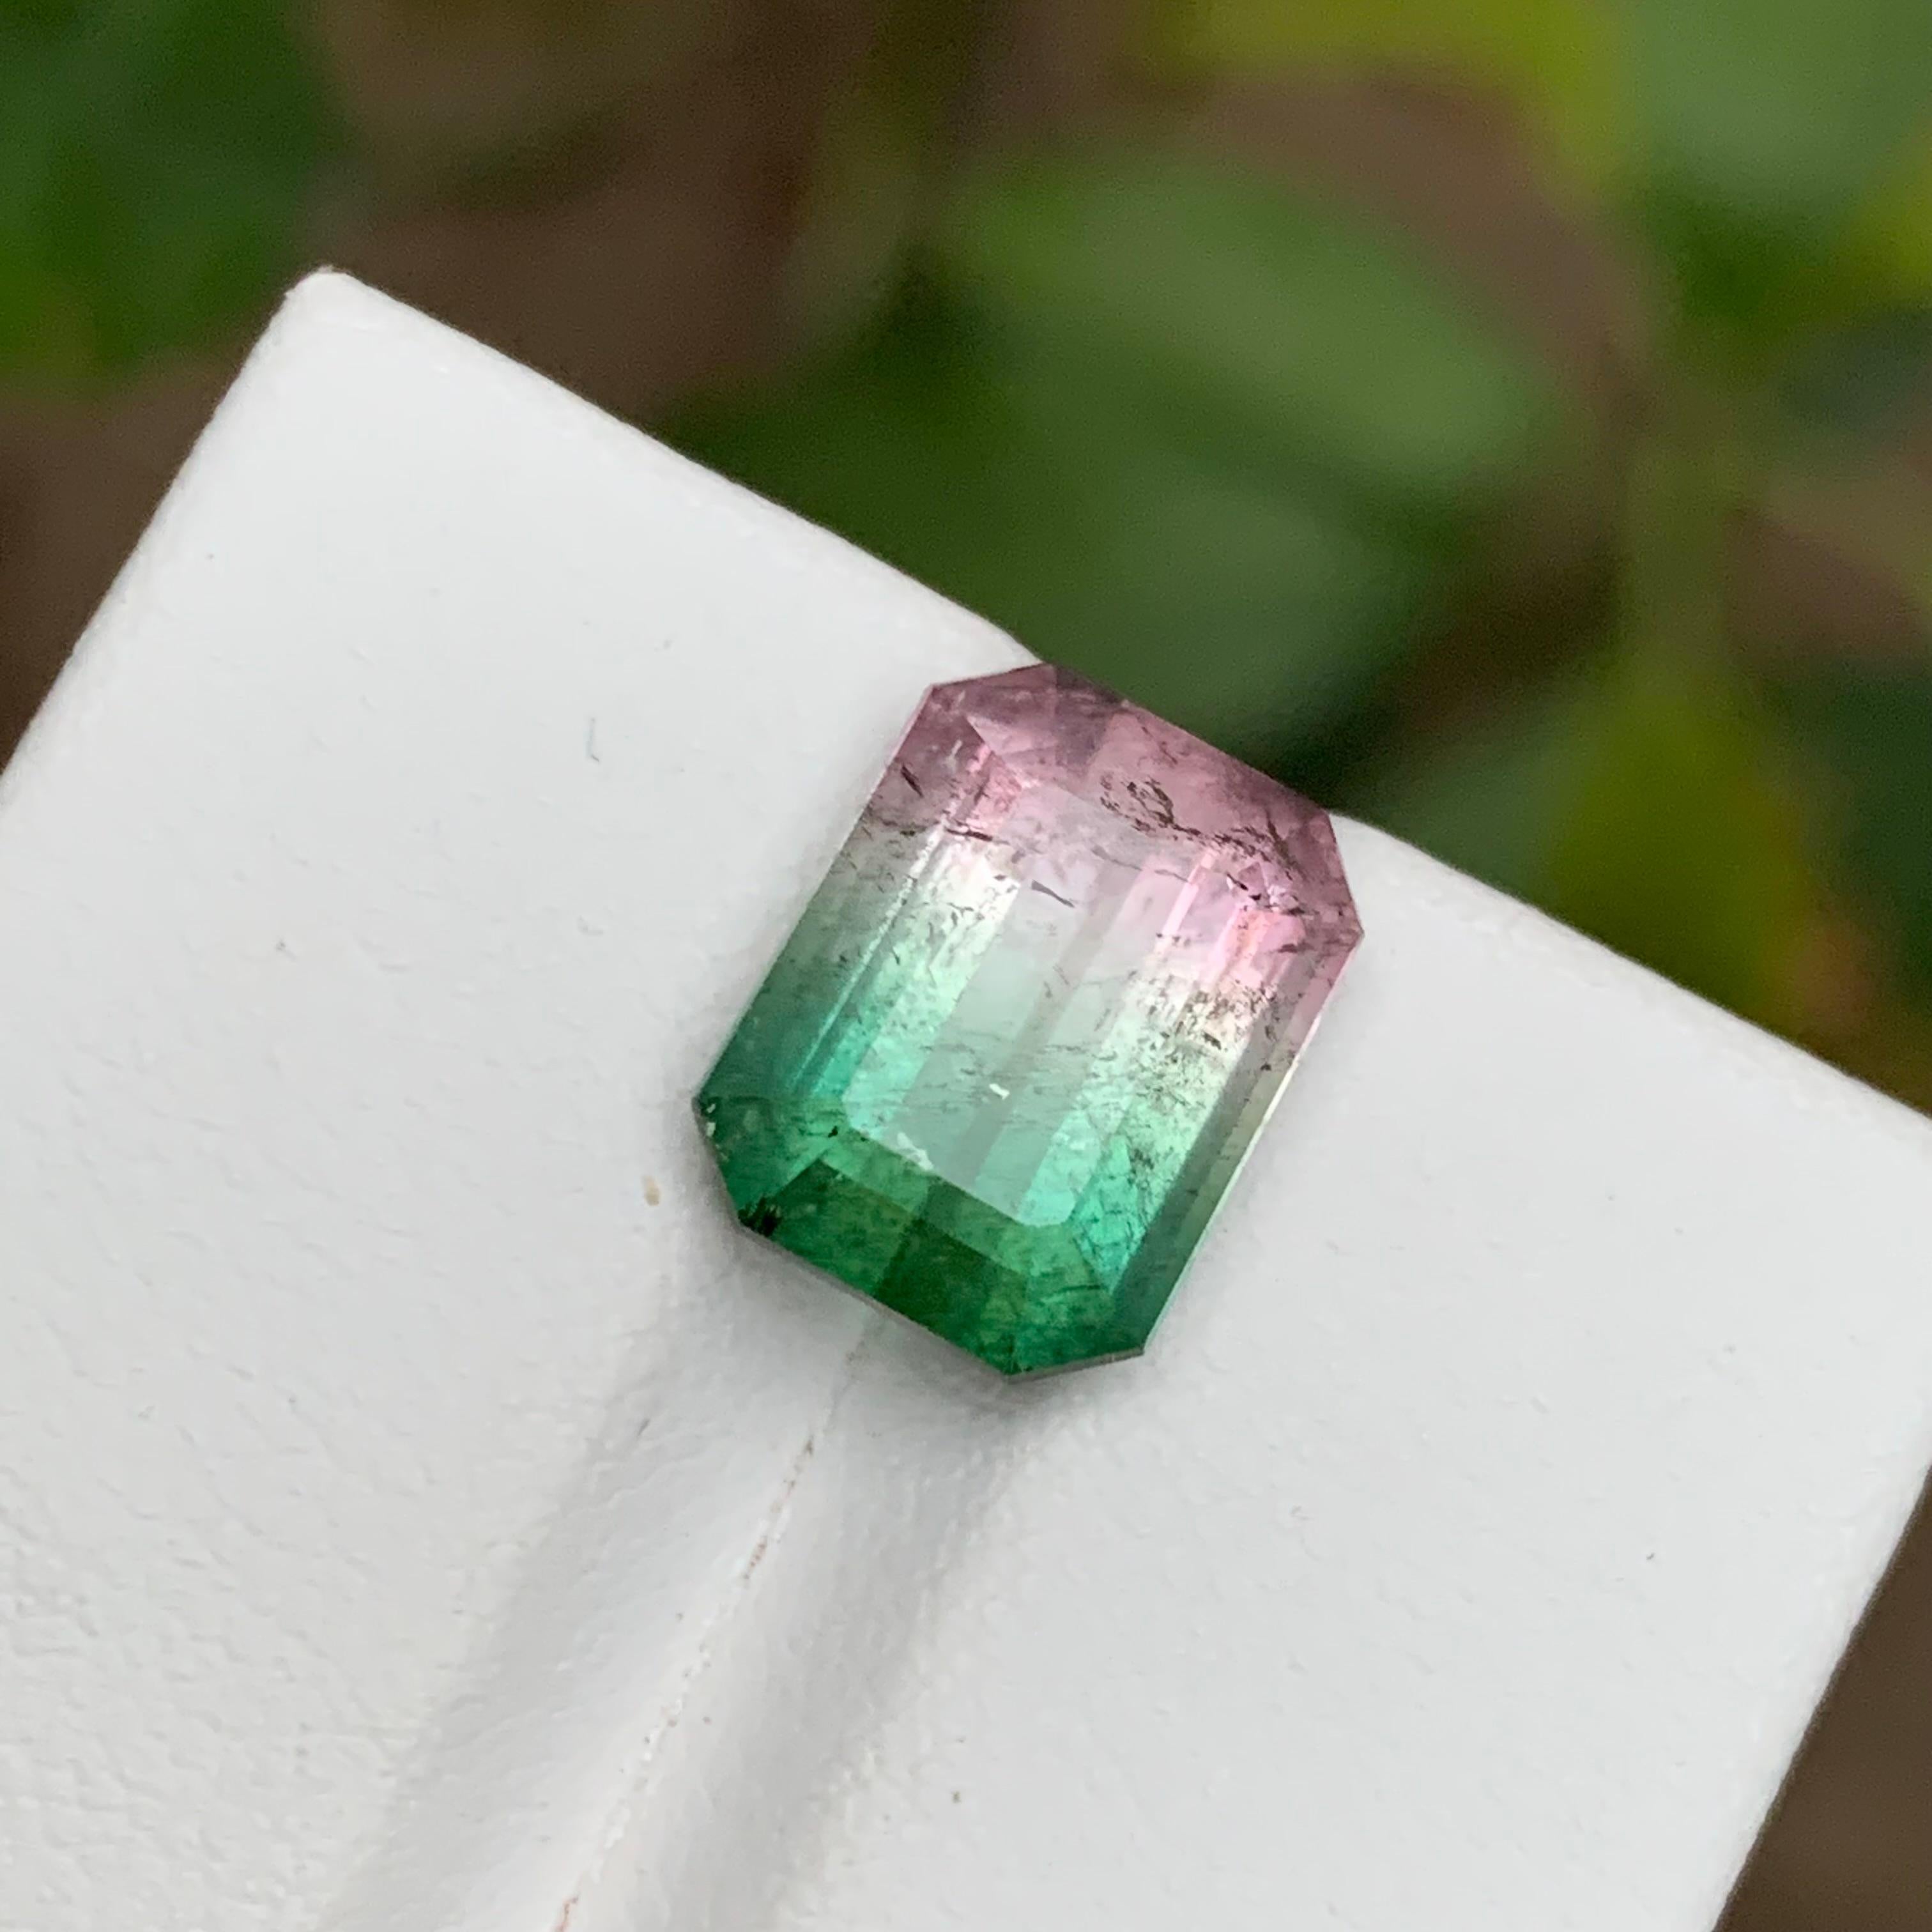 GEMSTONE TYPE: Tourmaline
PIECE(S): 1
WEIGHT: 5.90 Carat
SHAPE: Square Cushion 
SIZE (MM): 11.62 x 8.96 x 6.57 
COLOR: Watermelon Bicolor
CLARITY: Slightly Included
TREATMENT: Heated
ORIGIN: Afghanistan
CERTIFICATE: On demand

A very impressive 5.90